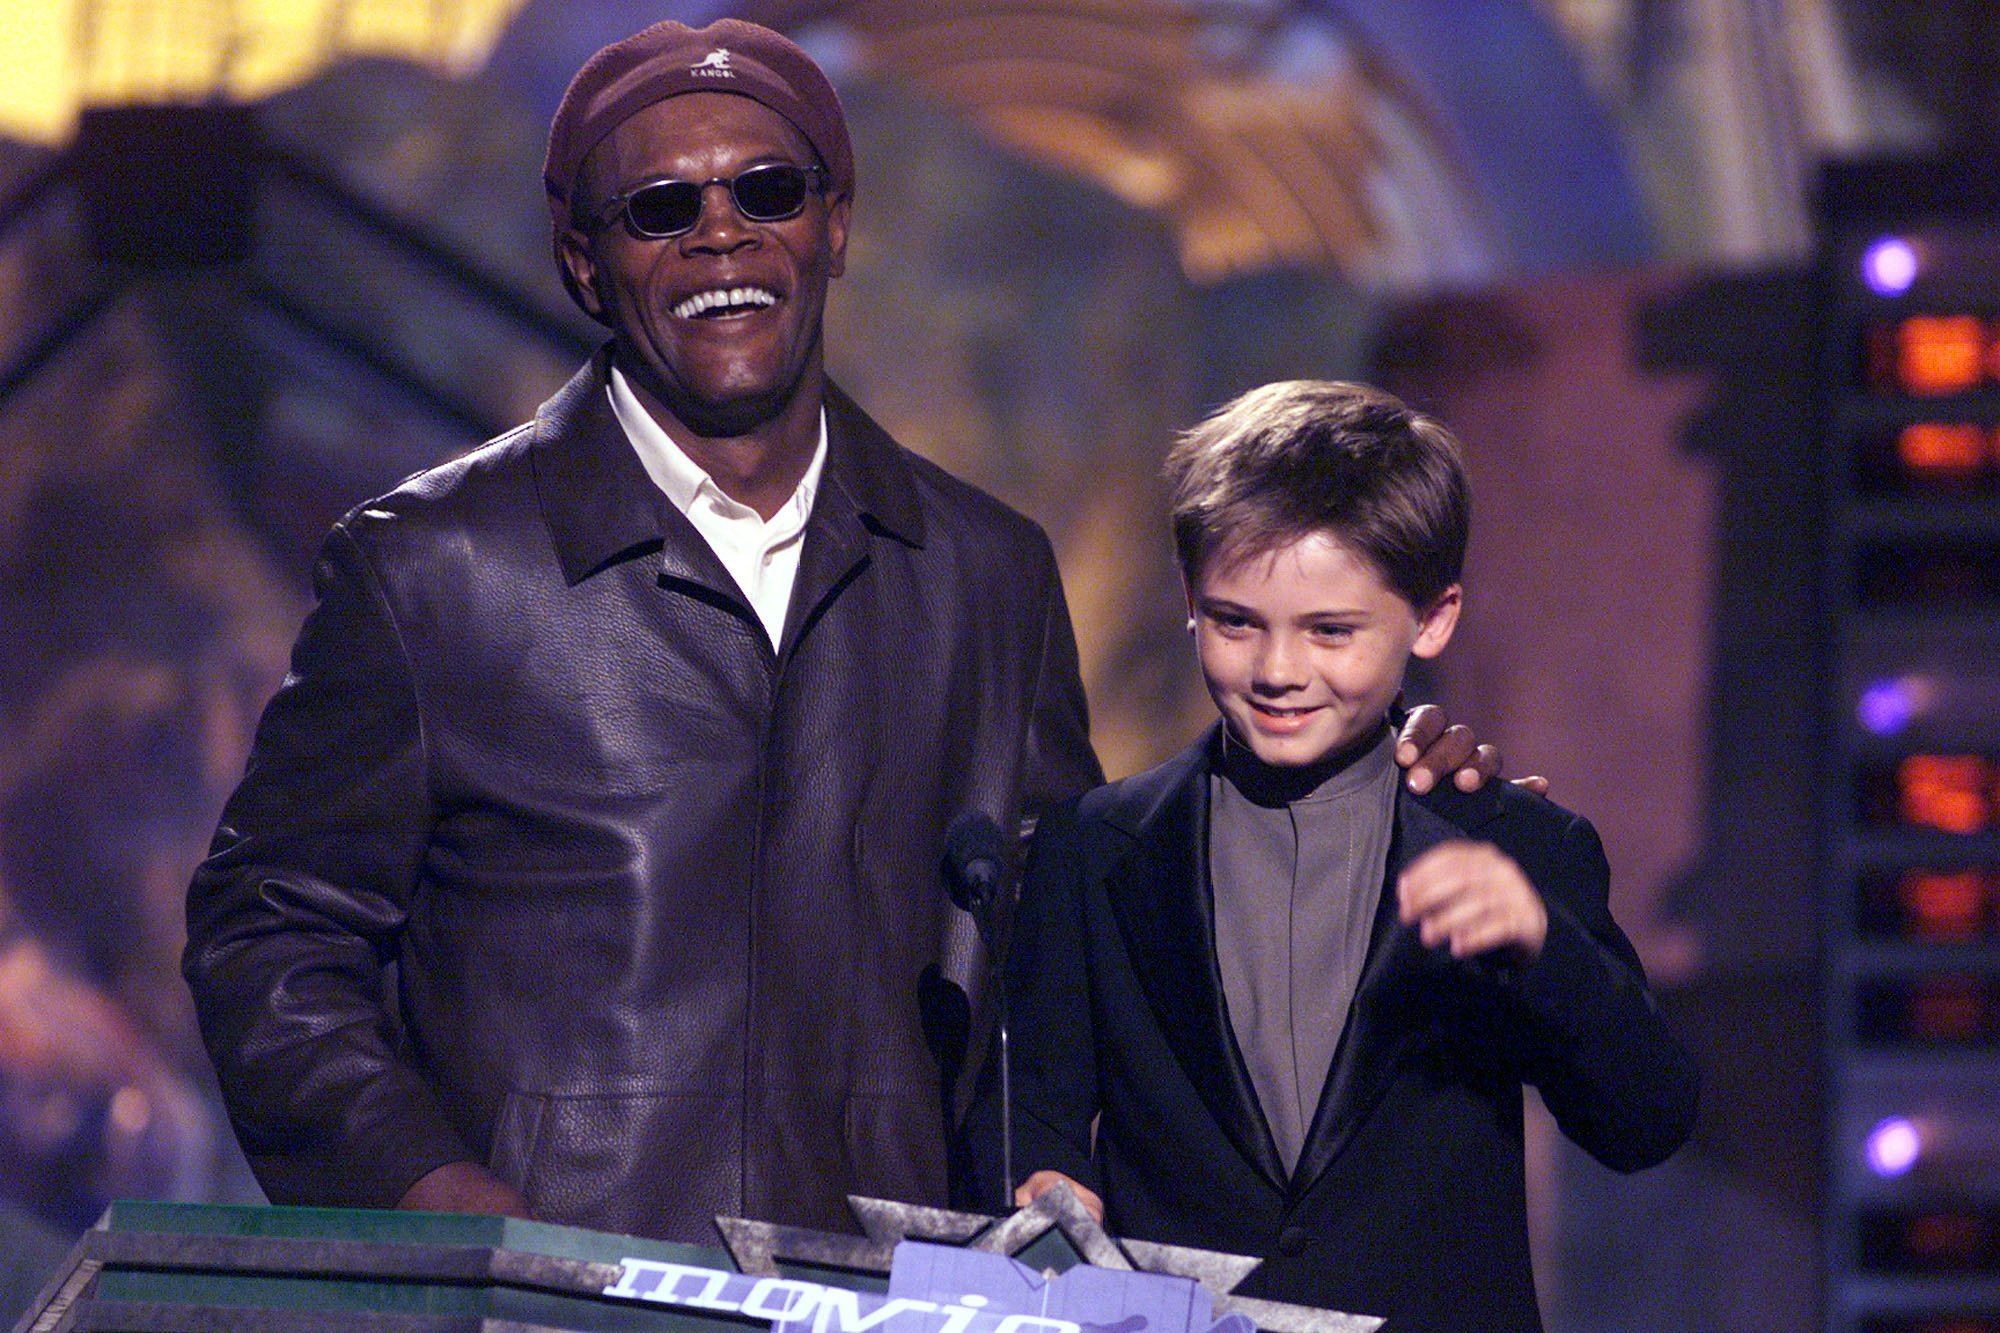 Jake Lloyd and Samuel L. Jackson in Los Angeles, California, on June 5, 1999 | Source: Getty Images 